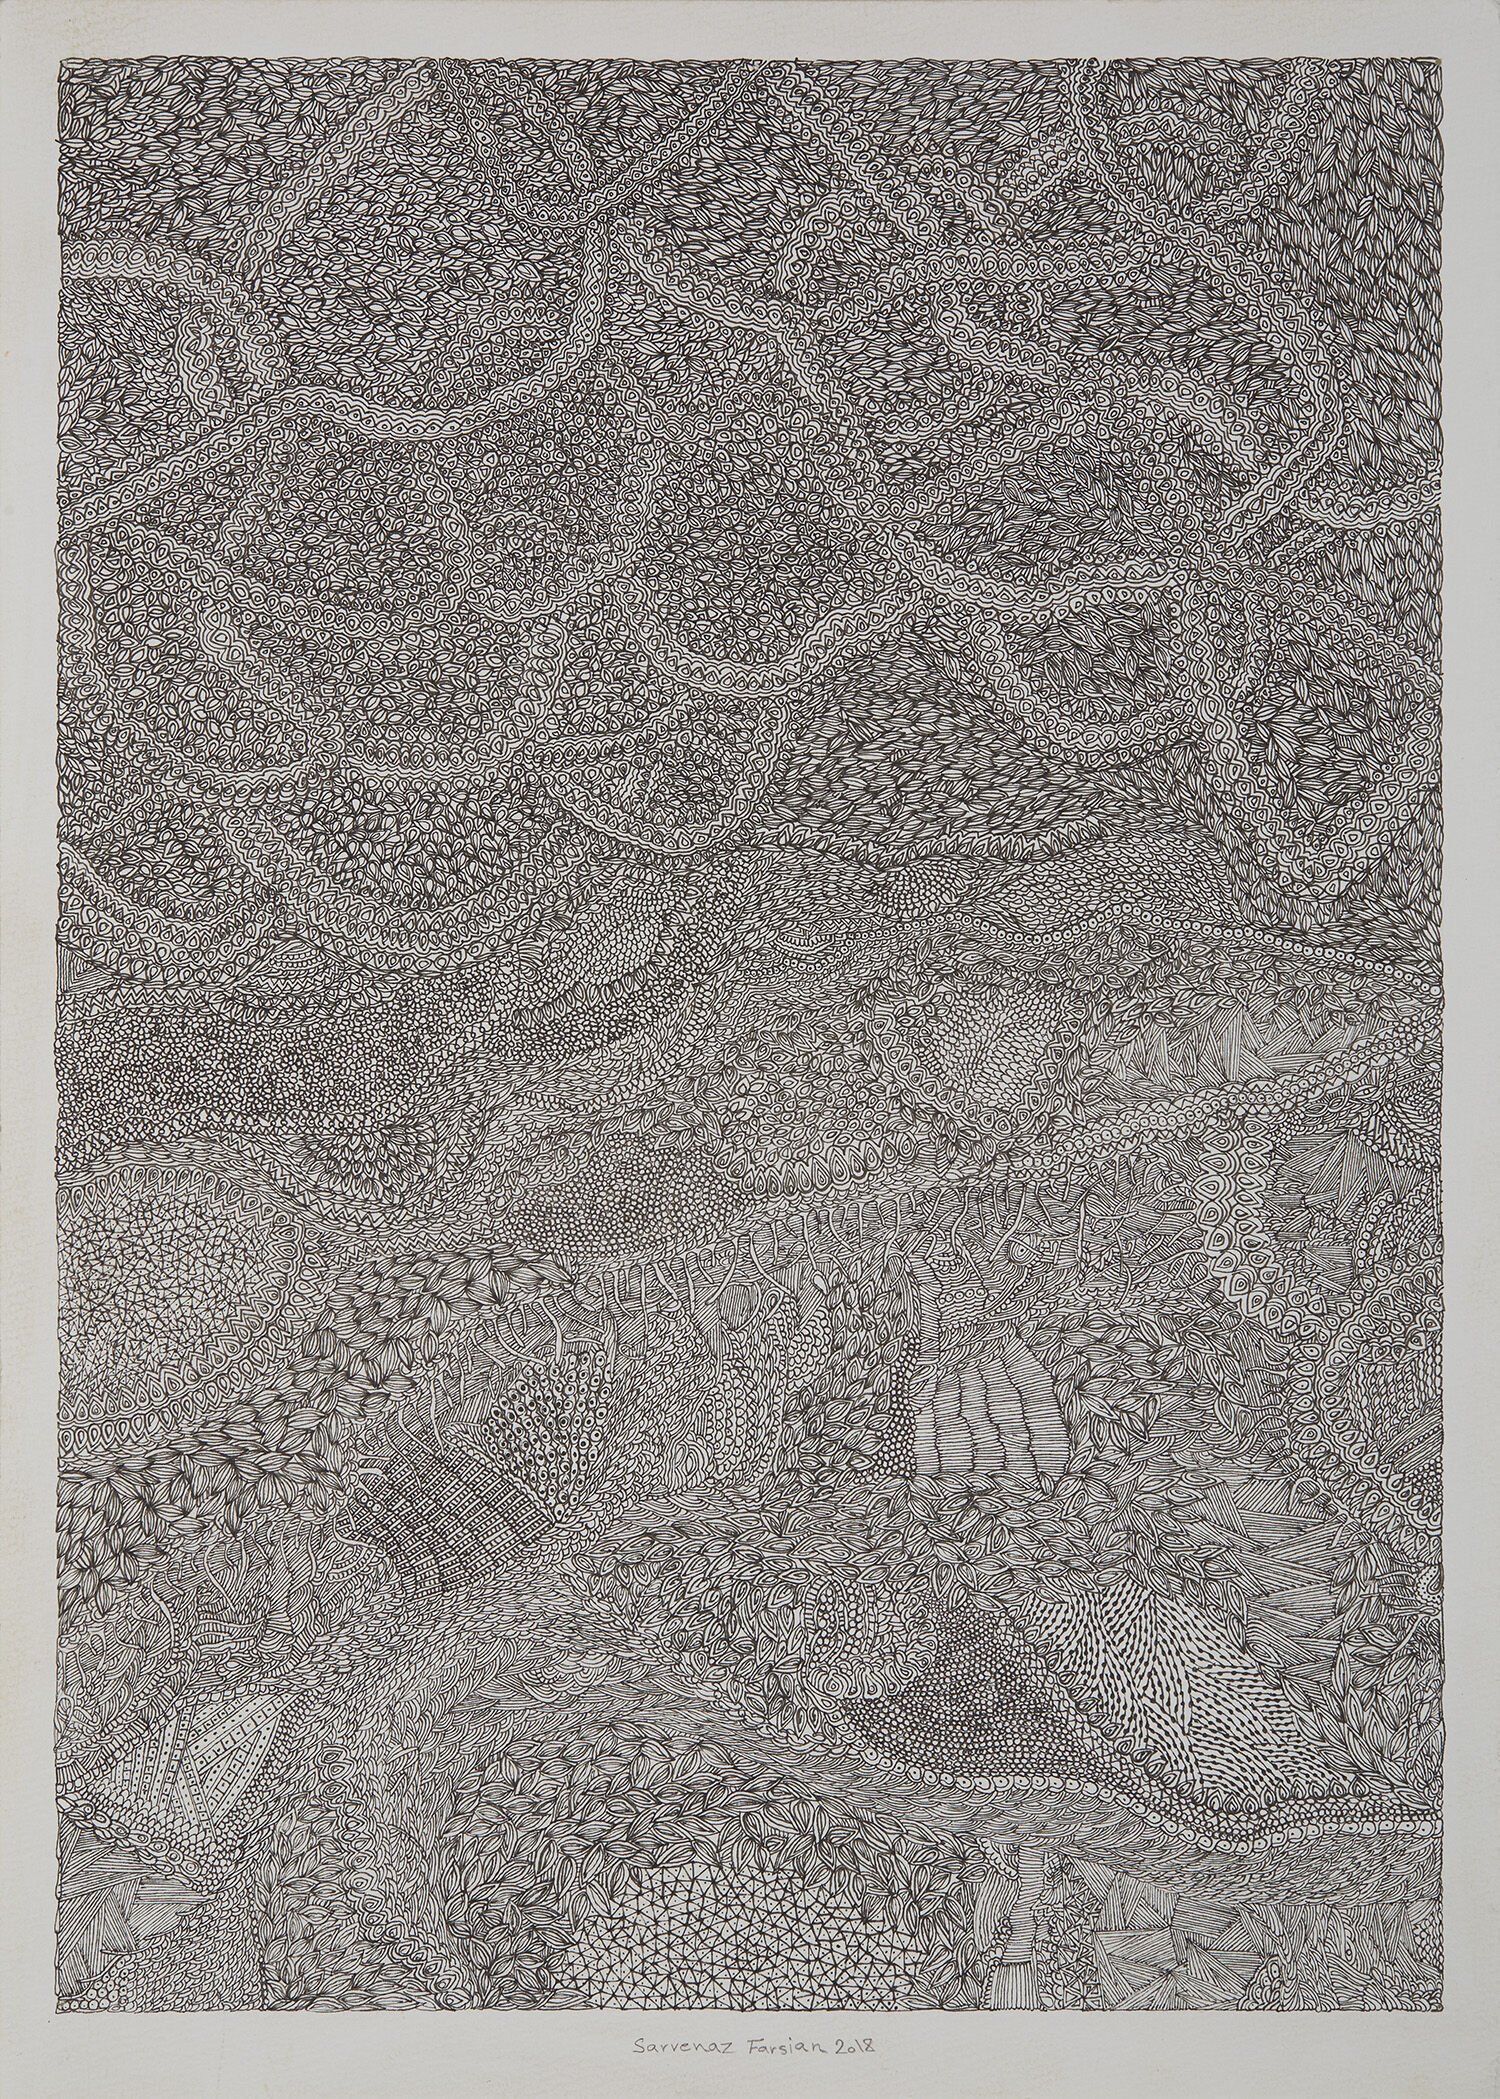   Sarvenaz Farsian  Untitled  , 2018 Ink on paper 14 x 10.75 inches 35.6 x 27.3 cm SvF 6 